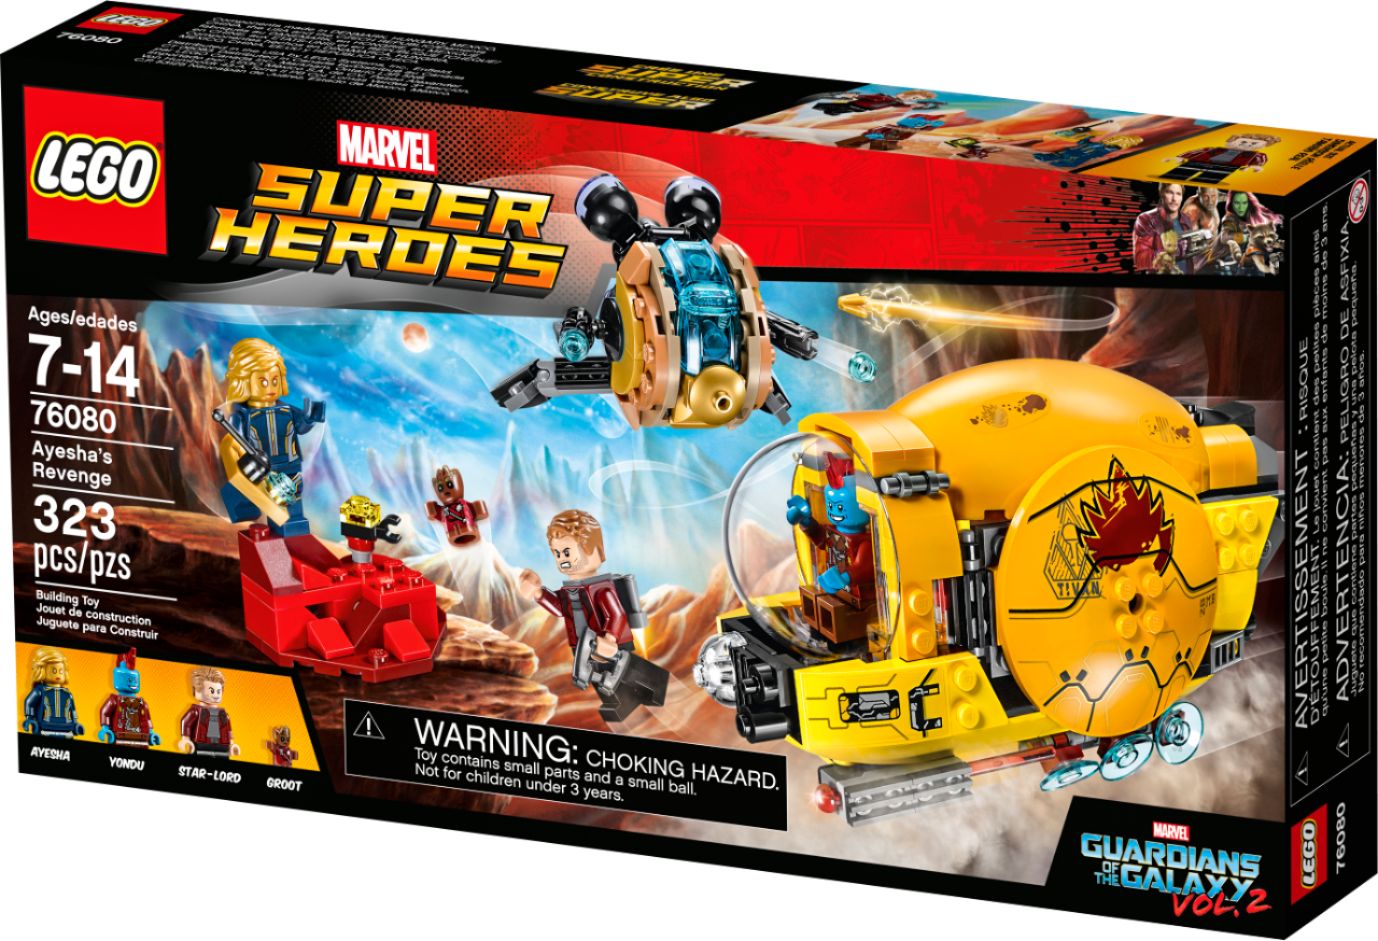 guardians of the galaxy 2 lego sets